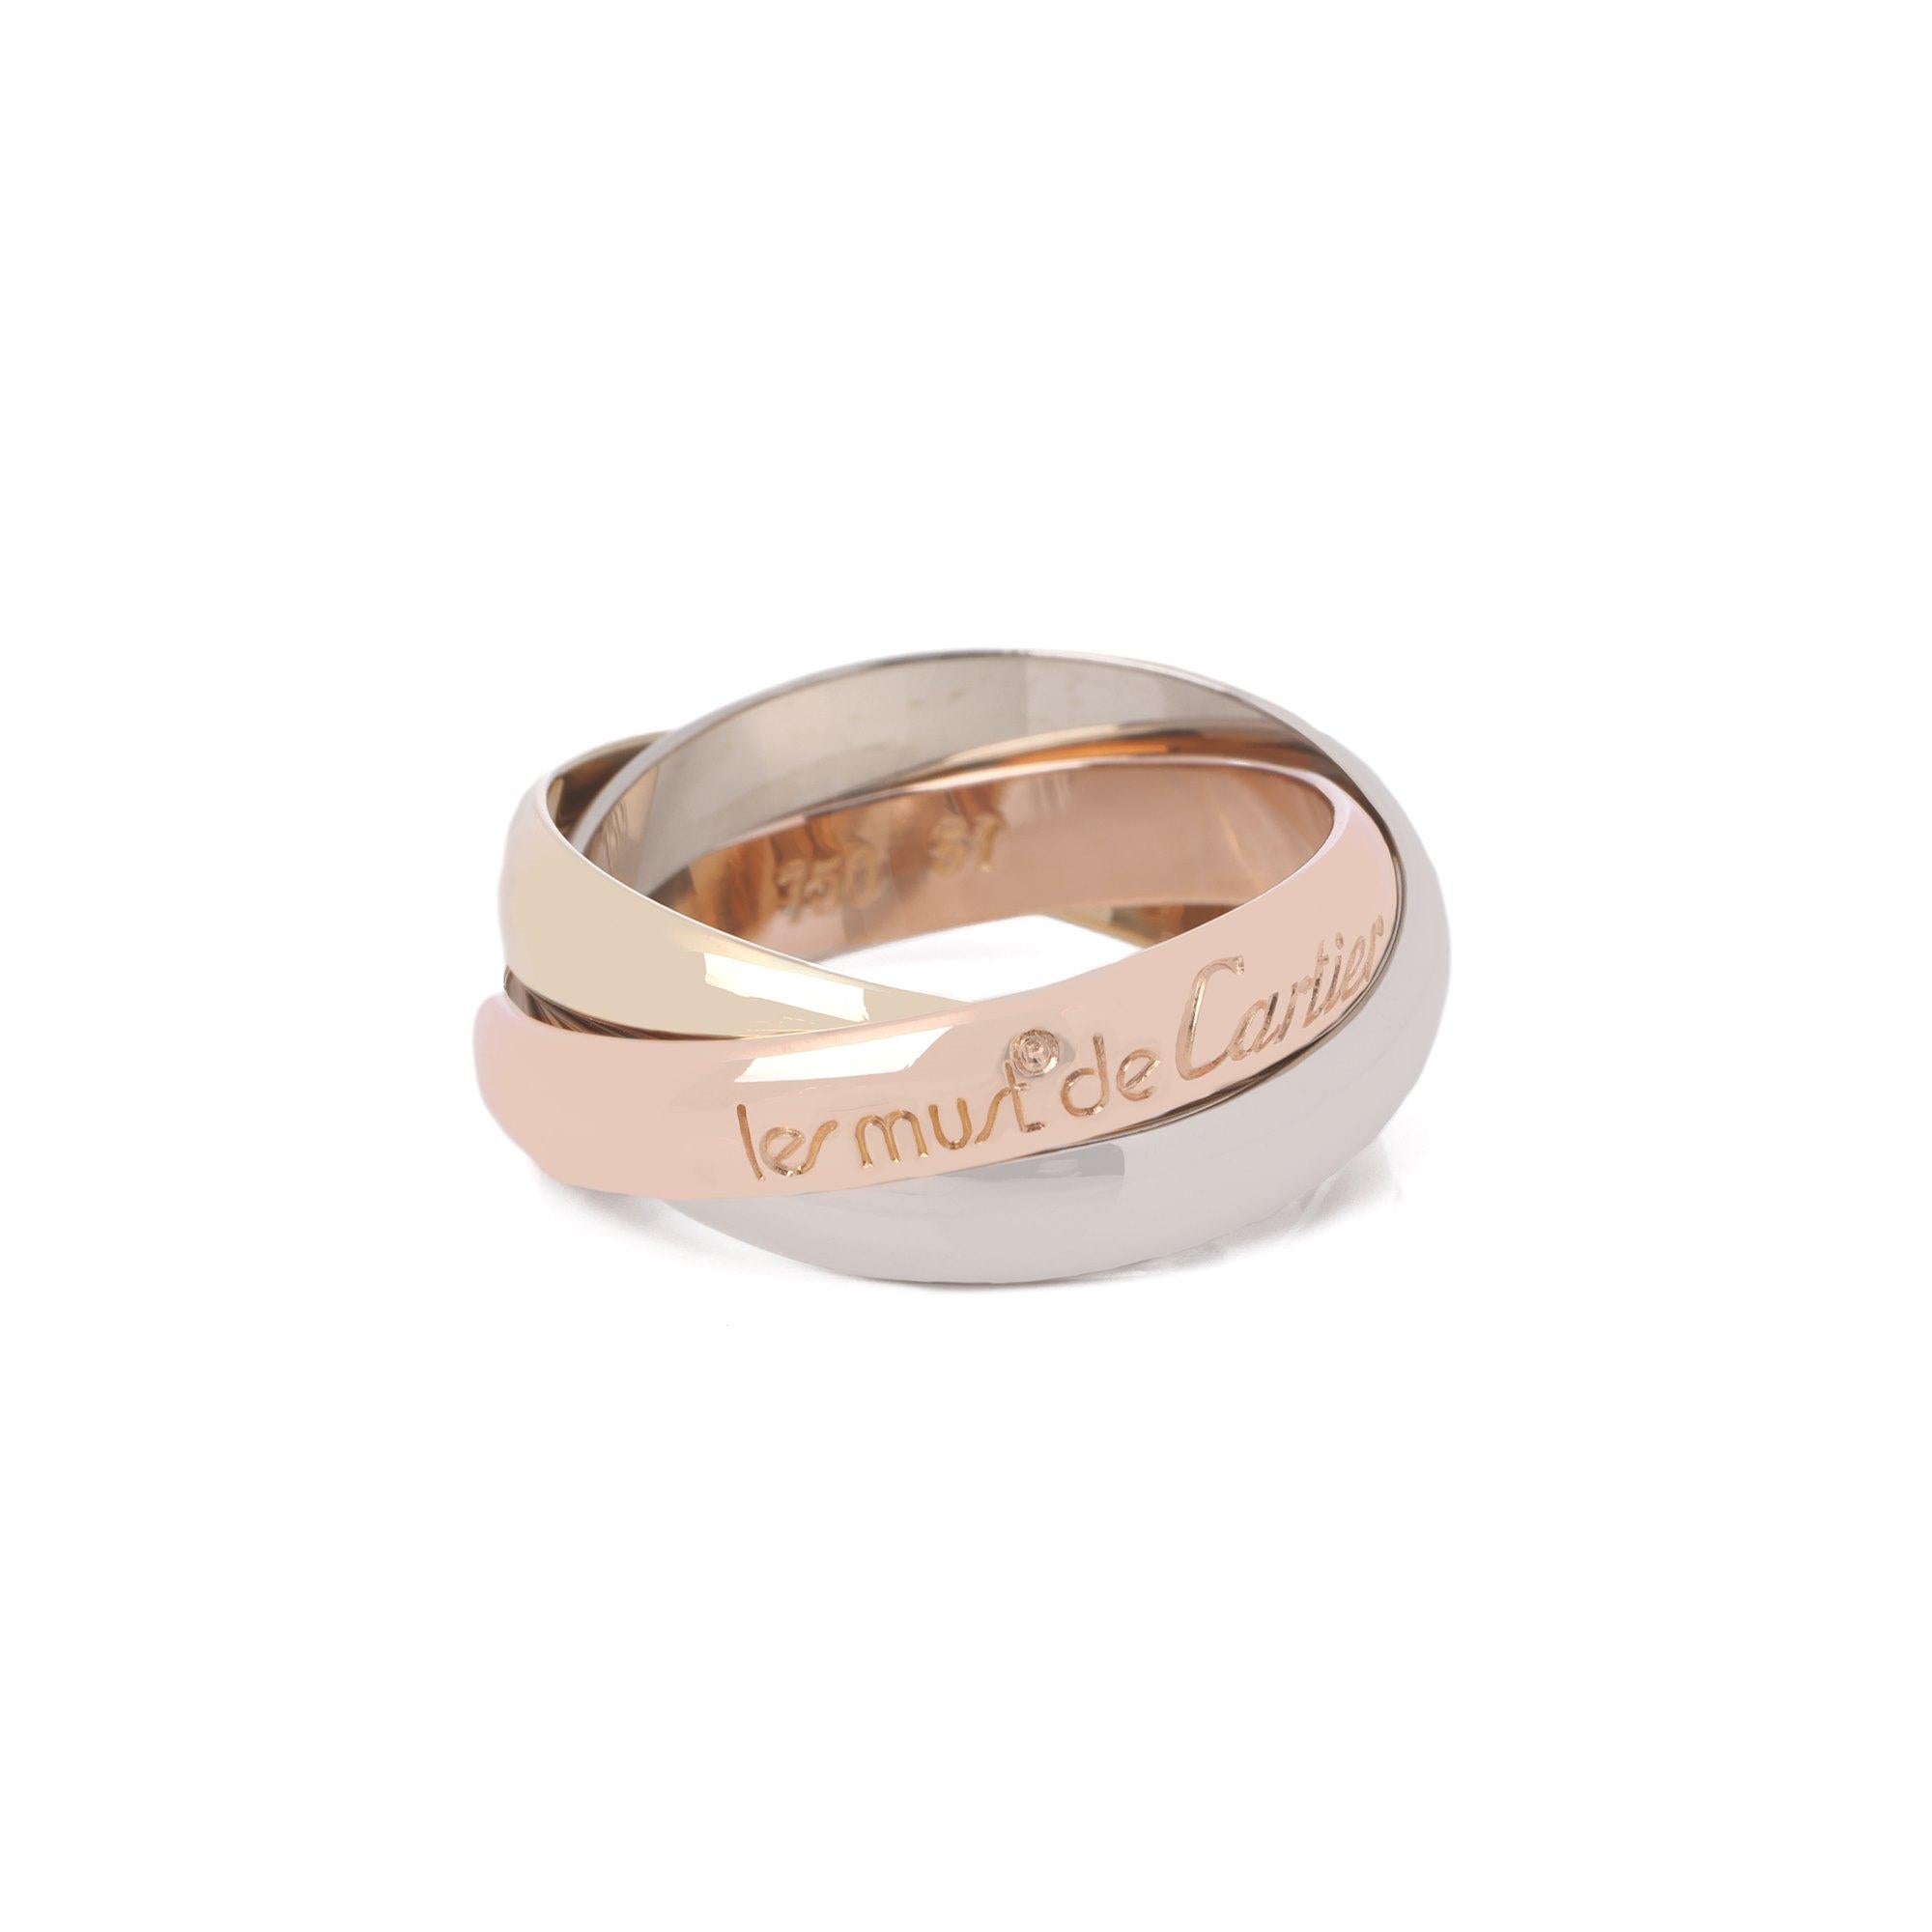 Cartier 18ct White Gold, 18ct Yellow Gold And 18ct Rose Gold Medium Les Must De Cartier Ring

Brand Cartier
Model Les Must de Cartier Ring
Product Type Ring
Serial Number A3****
Material(s) 18ct White Gold, 18ct Yellow Gold, 18ct Rose Gold
UK Ring